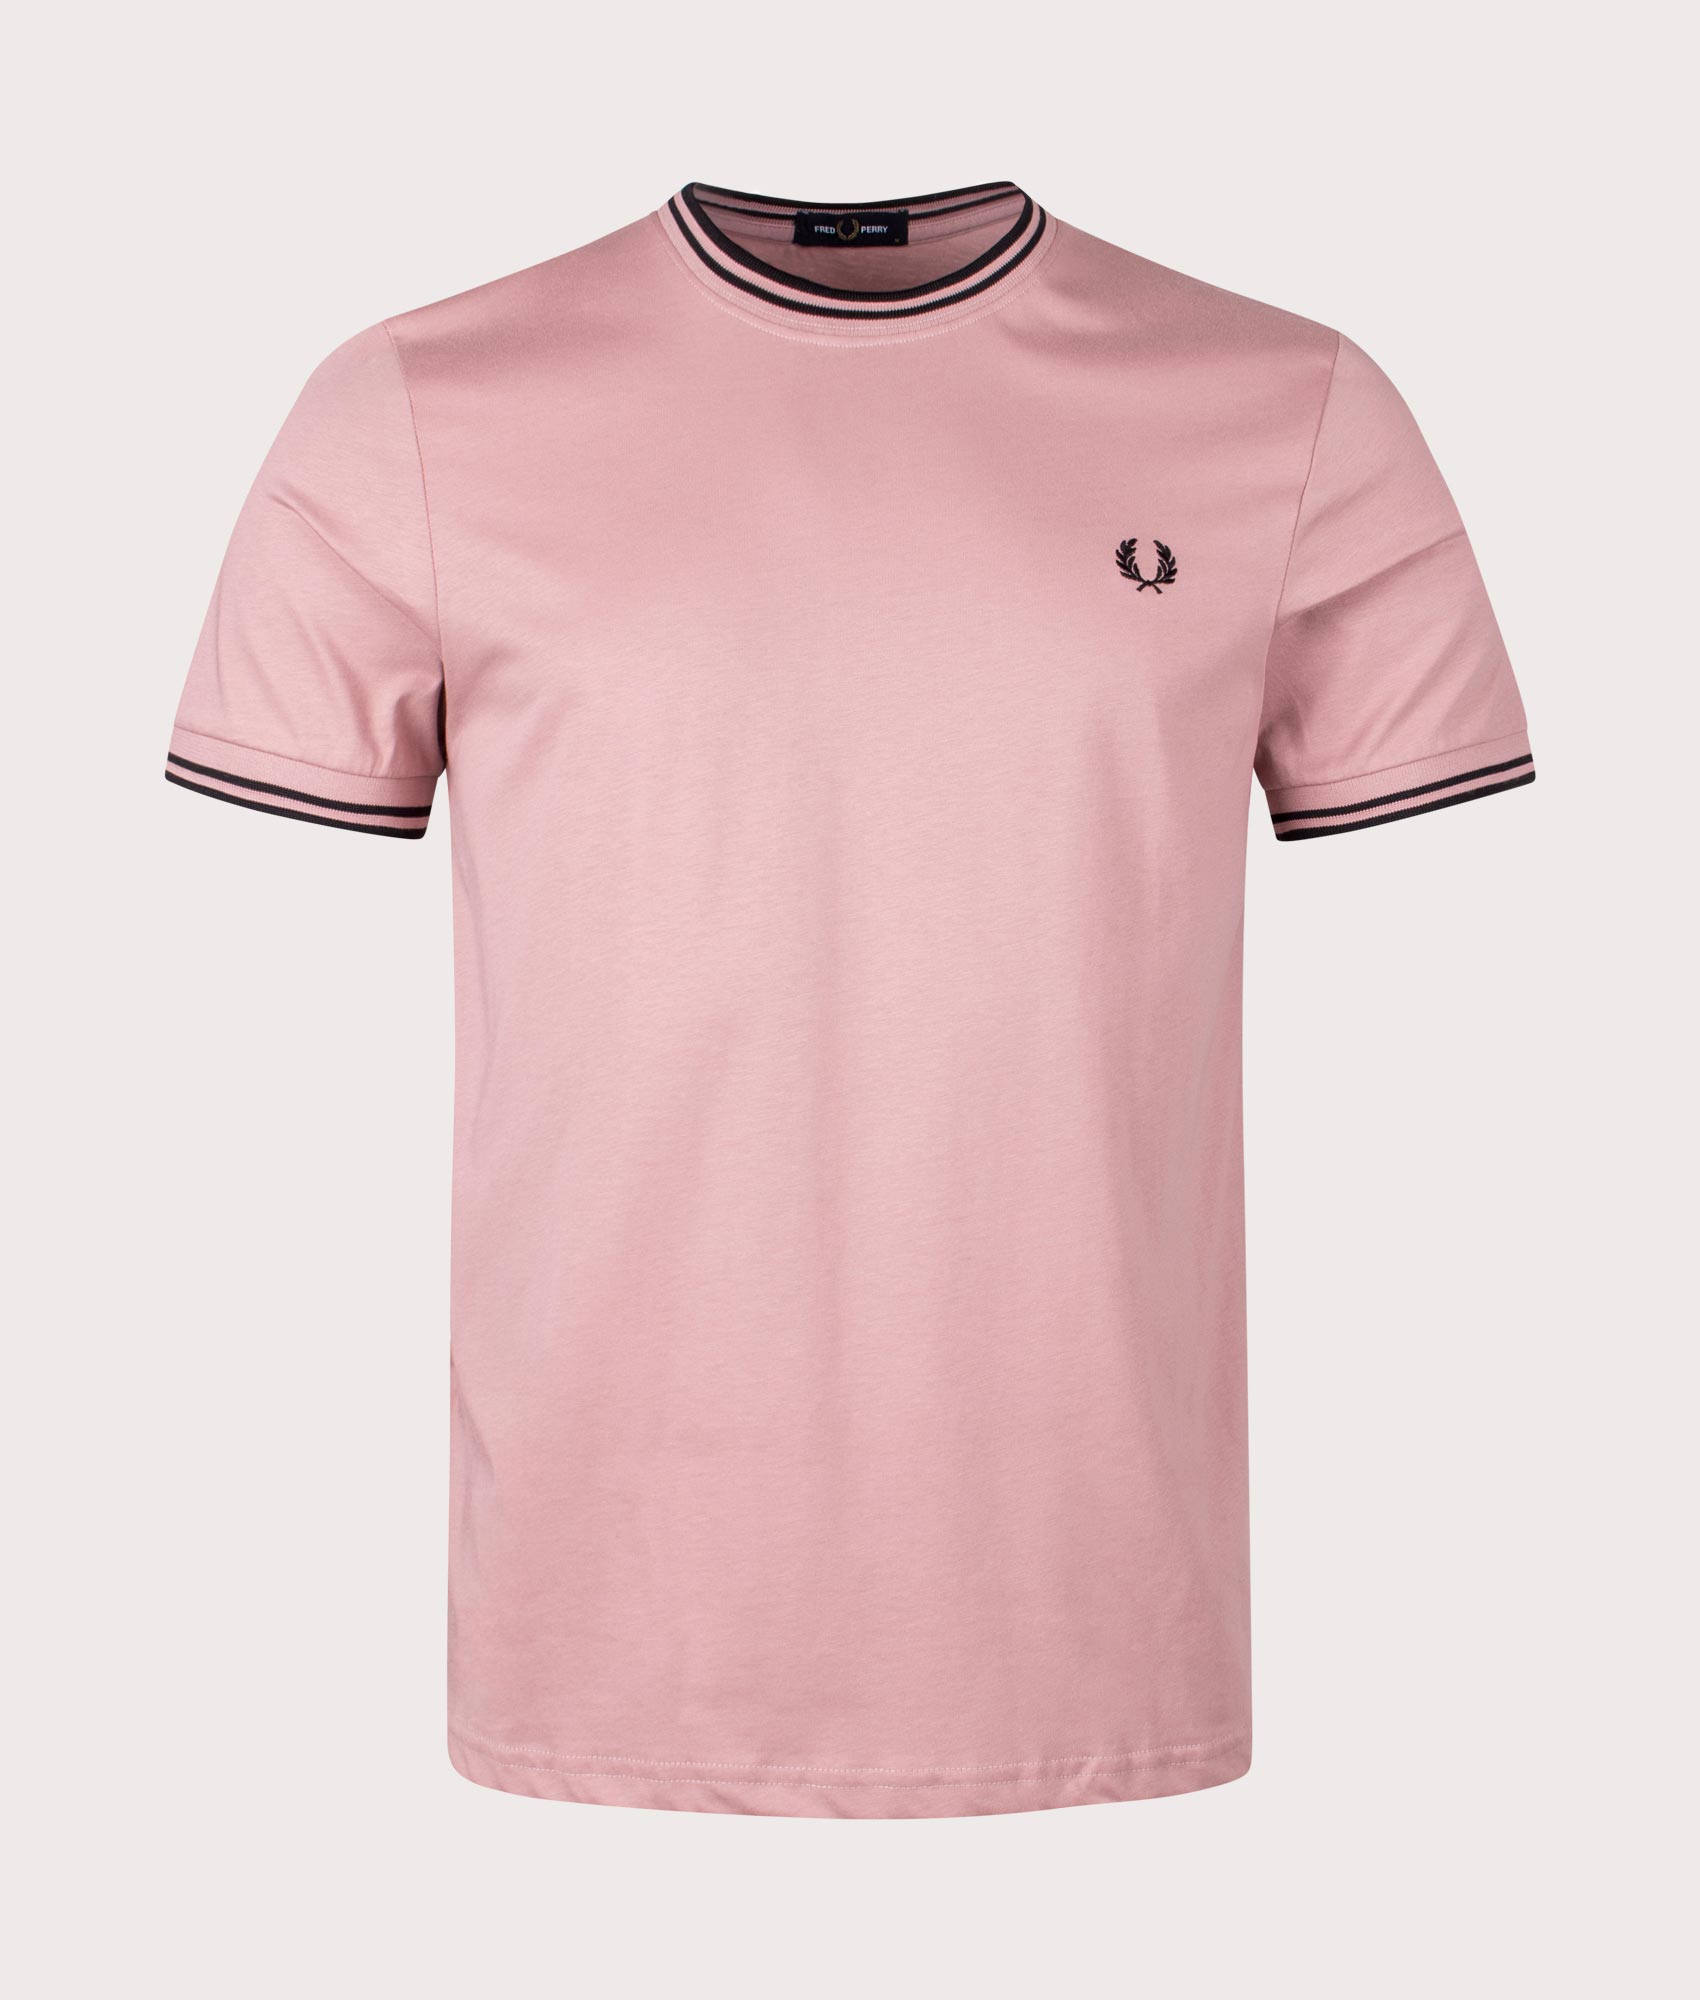 Fred Perry Mens Twin Tipped T-Shirt - Colour: T89 Dusty Rose Pink/Black - Size: Large